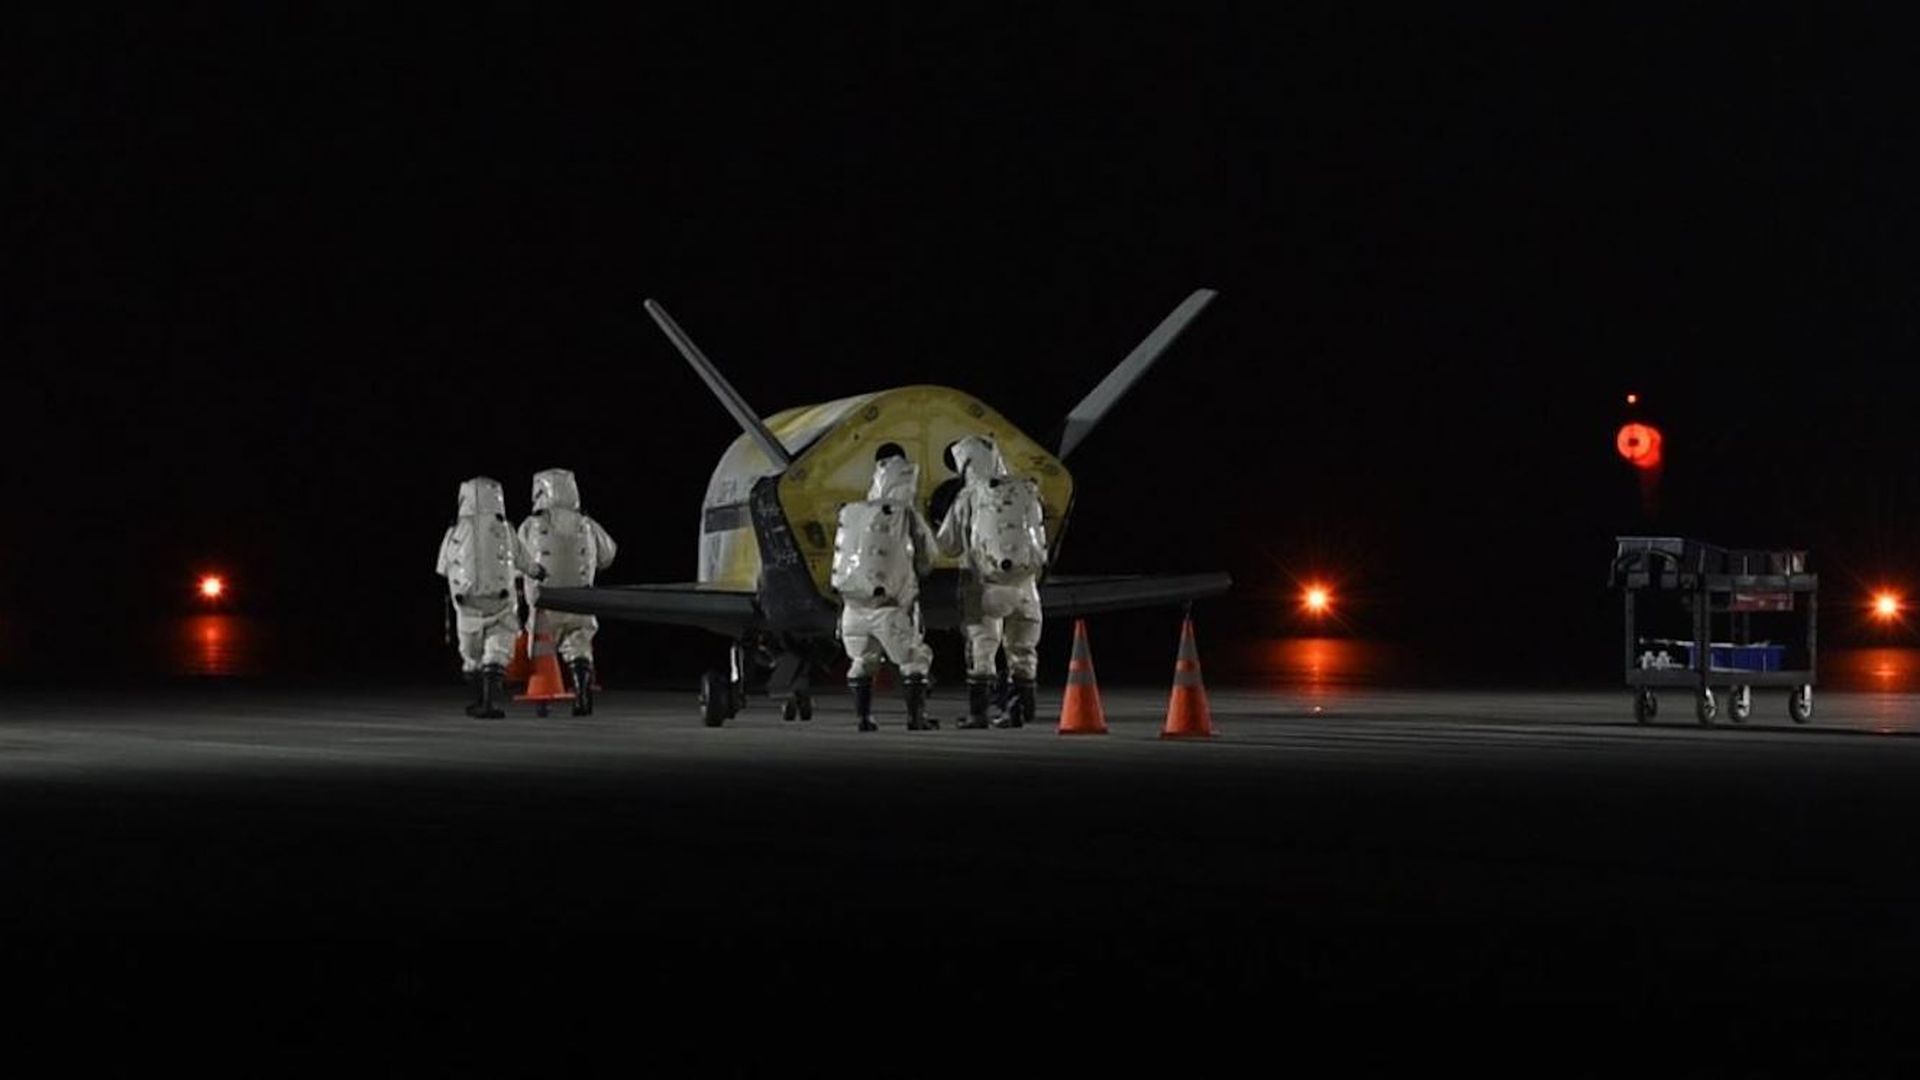 Workers tend to the X-37b space plane after landing in the dark in Florida